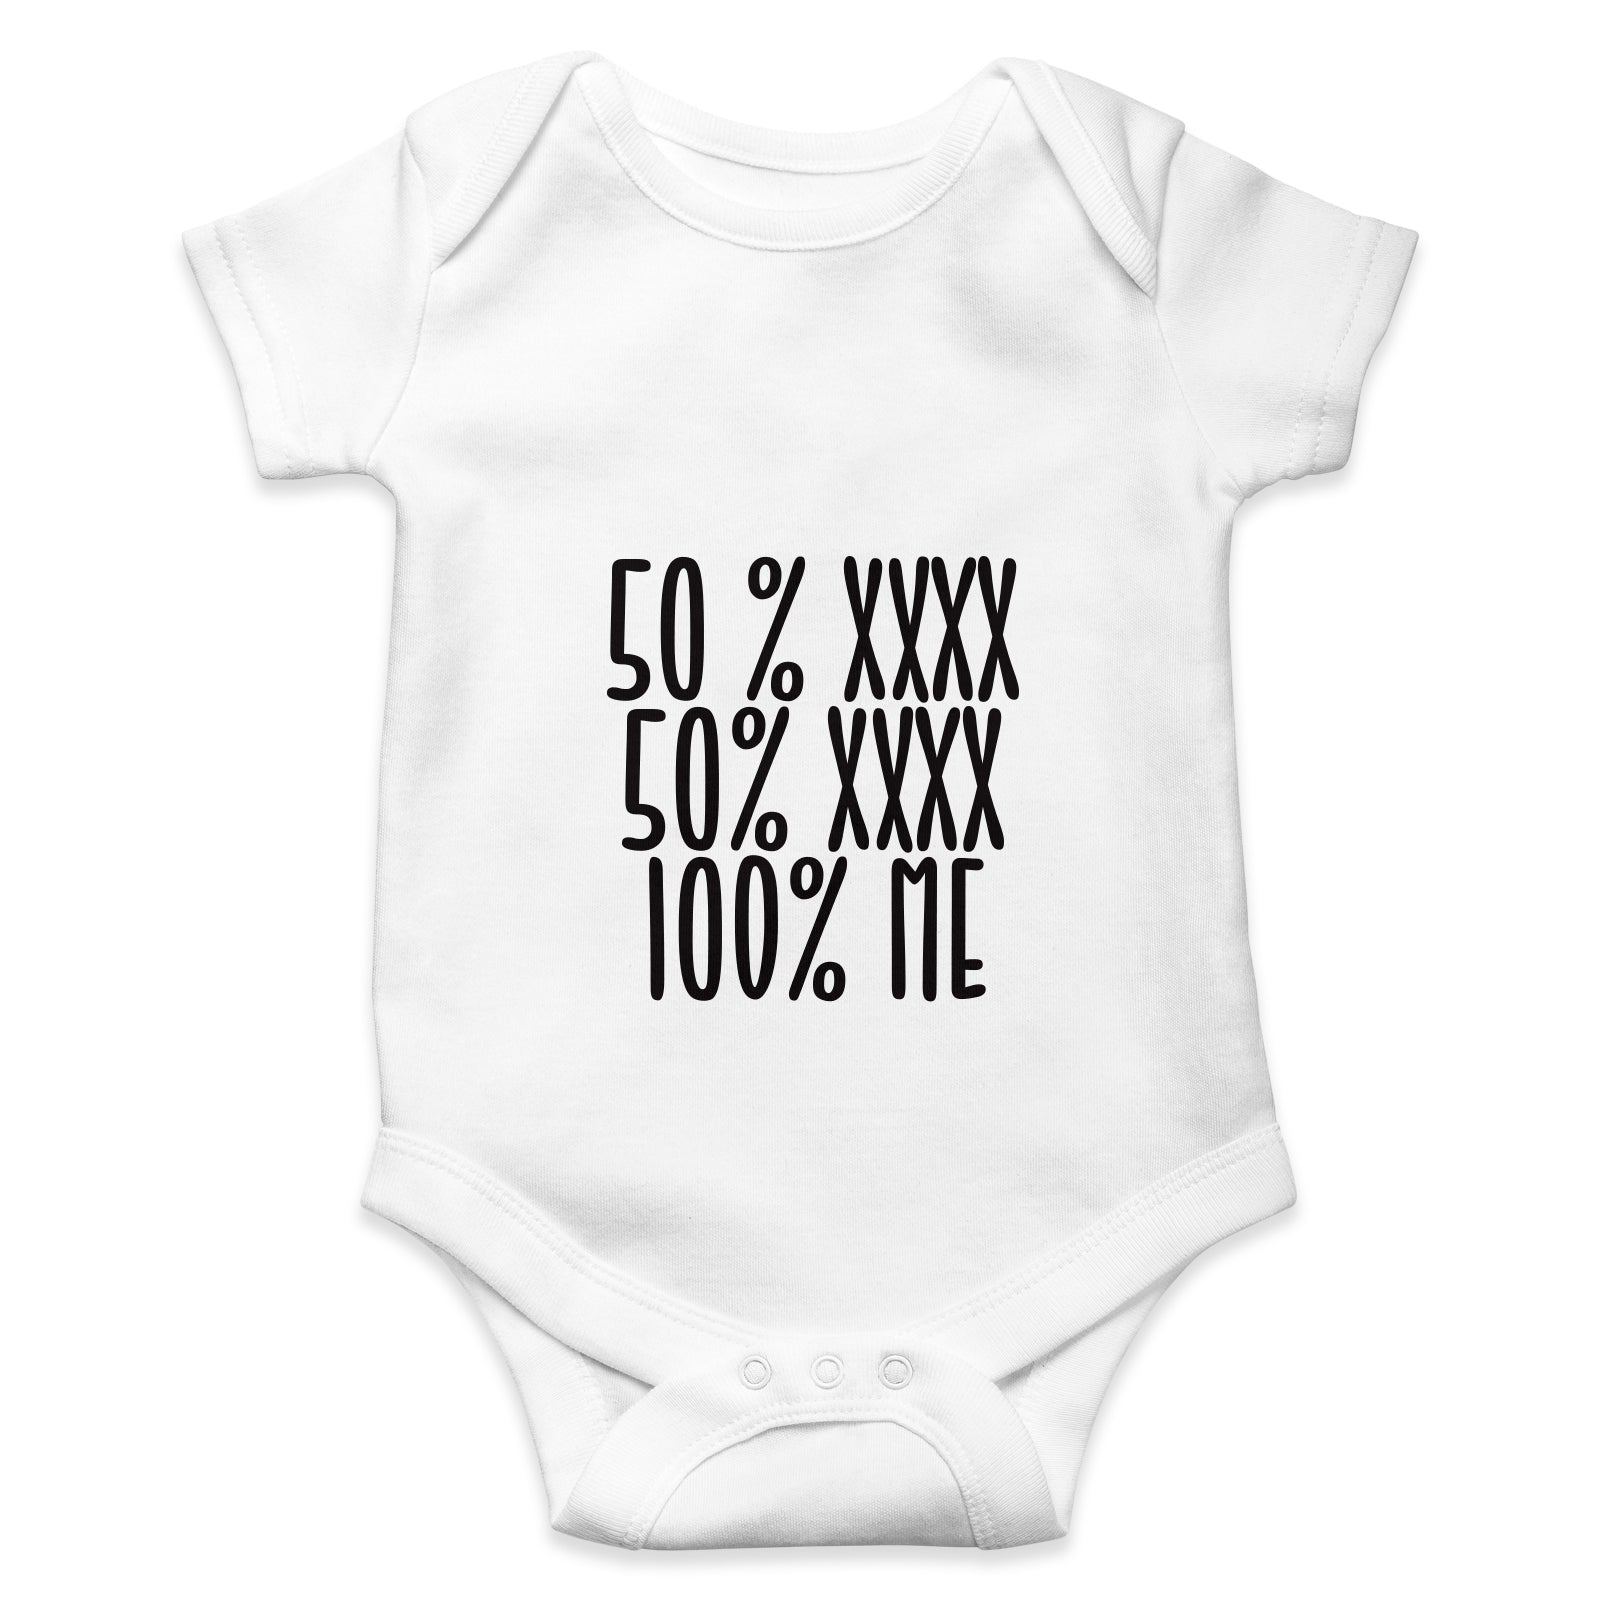 Personalised White Baby Body Suit Grow Vest - 50%